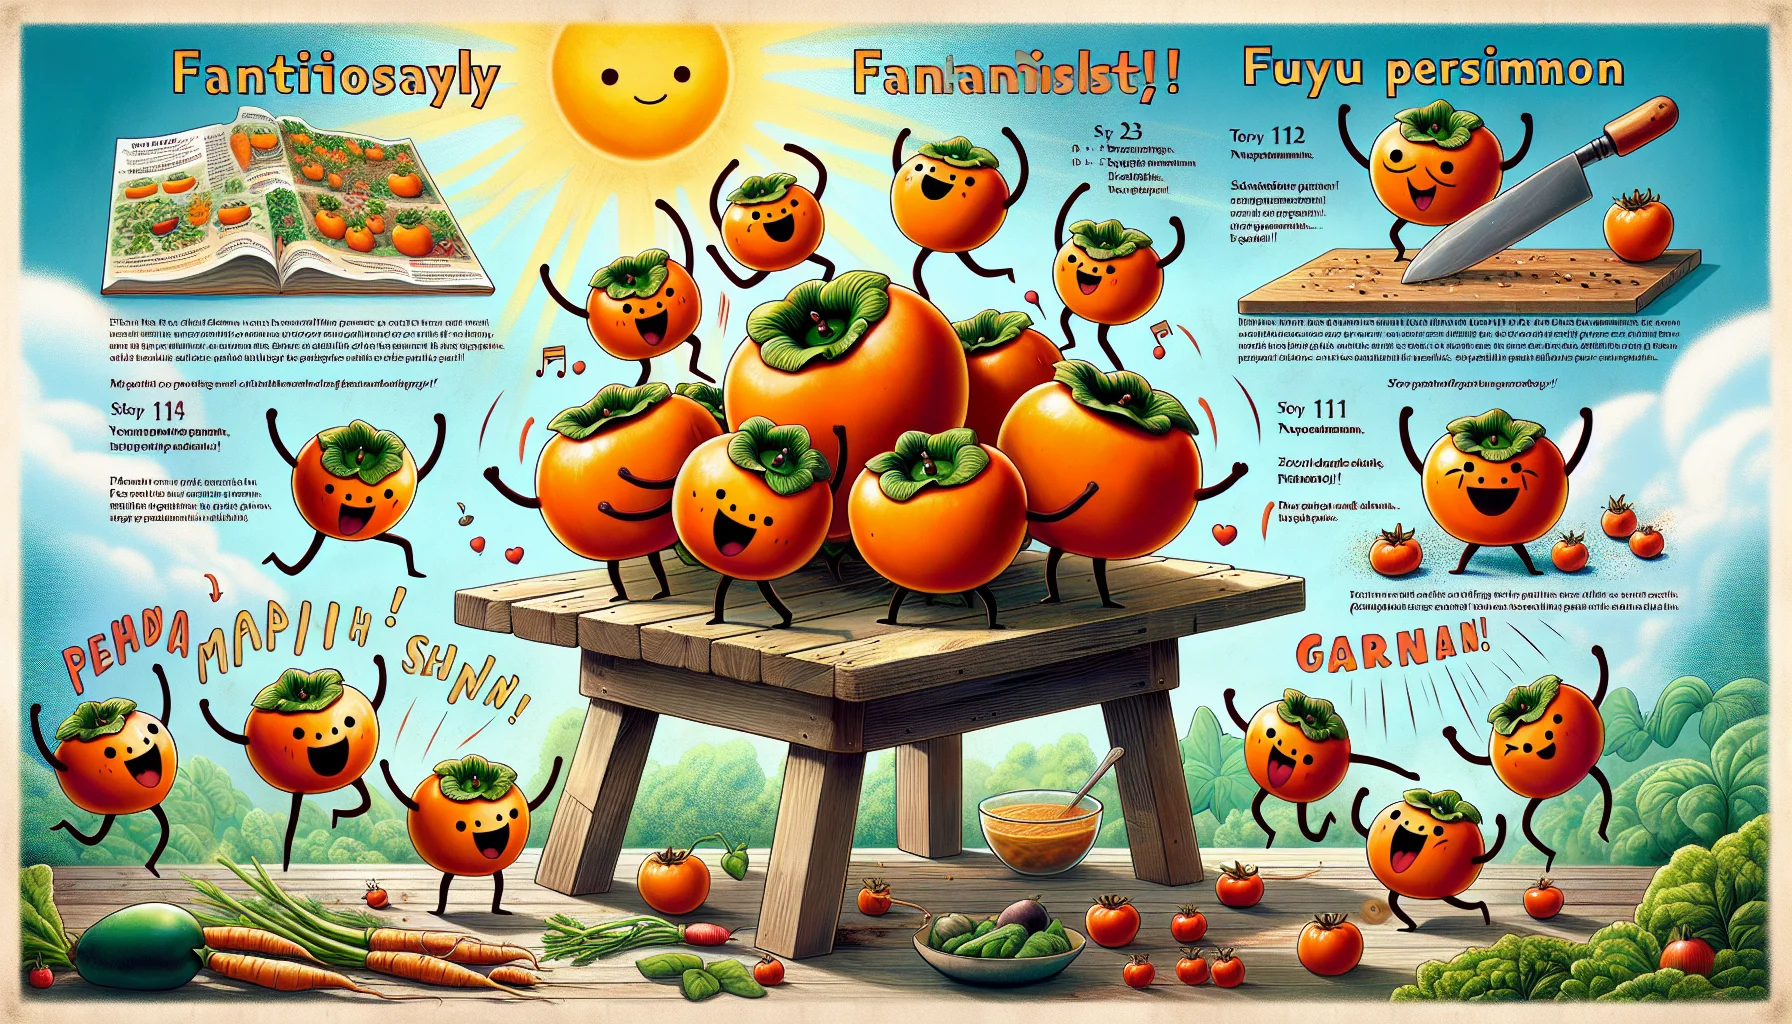 Fantastically, a bunch of fuyu persimmons dance and sing atop a rustic wooden table, playfully inviting people to partake in the joy of gardening. An illustrated, step-by-step recipe for a delightful fuyu persimmon dish covers the background, with the ingredients and process detailed in a simple manner. The scene portrays a sunny garden setting, vibrant and lively, with a variety of vegetables sprouting up from the ground, echoing the exuberance of the fuyu persimmons. The high-resolution image should evoke an approachable, whimsical atmosphere that encourages everyone to embark on their gardening journey.